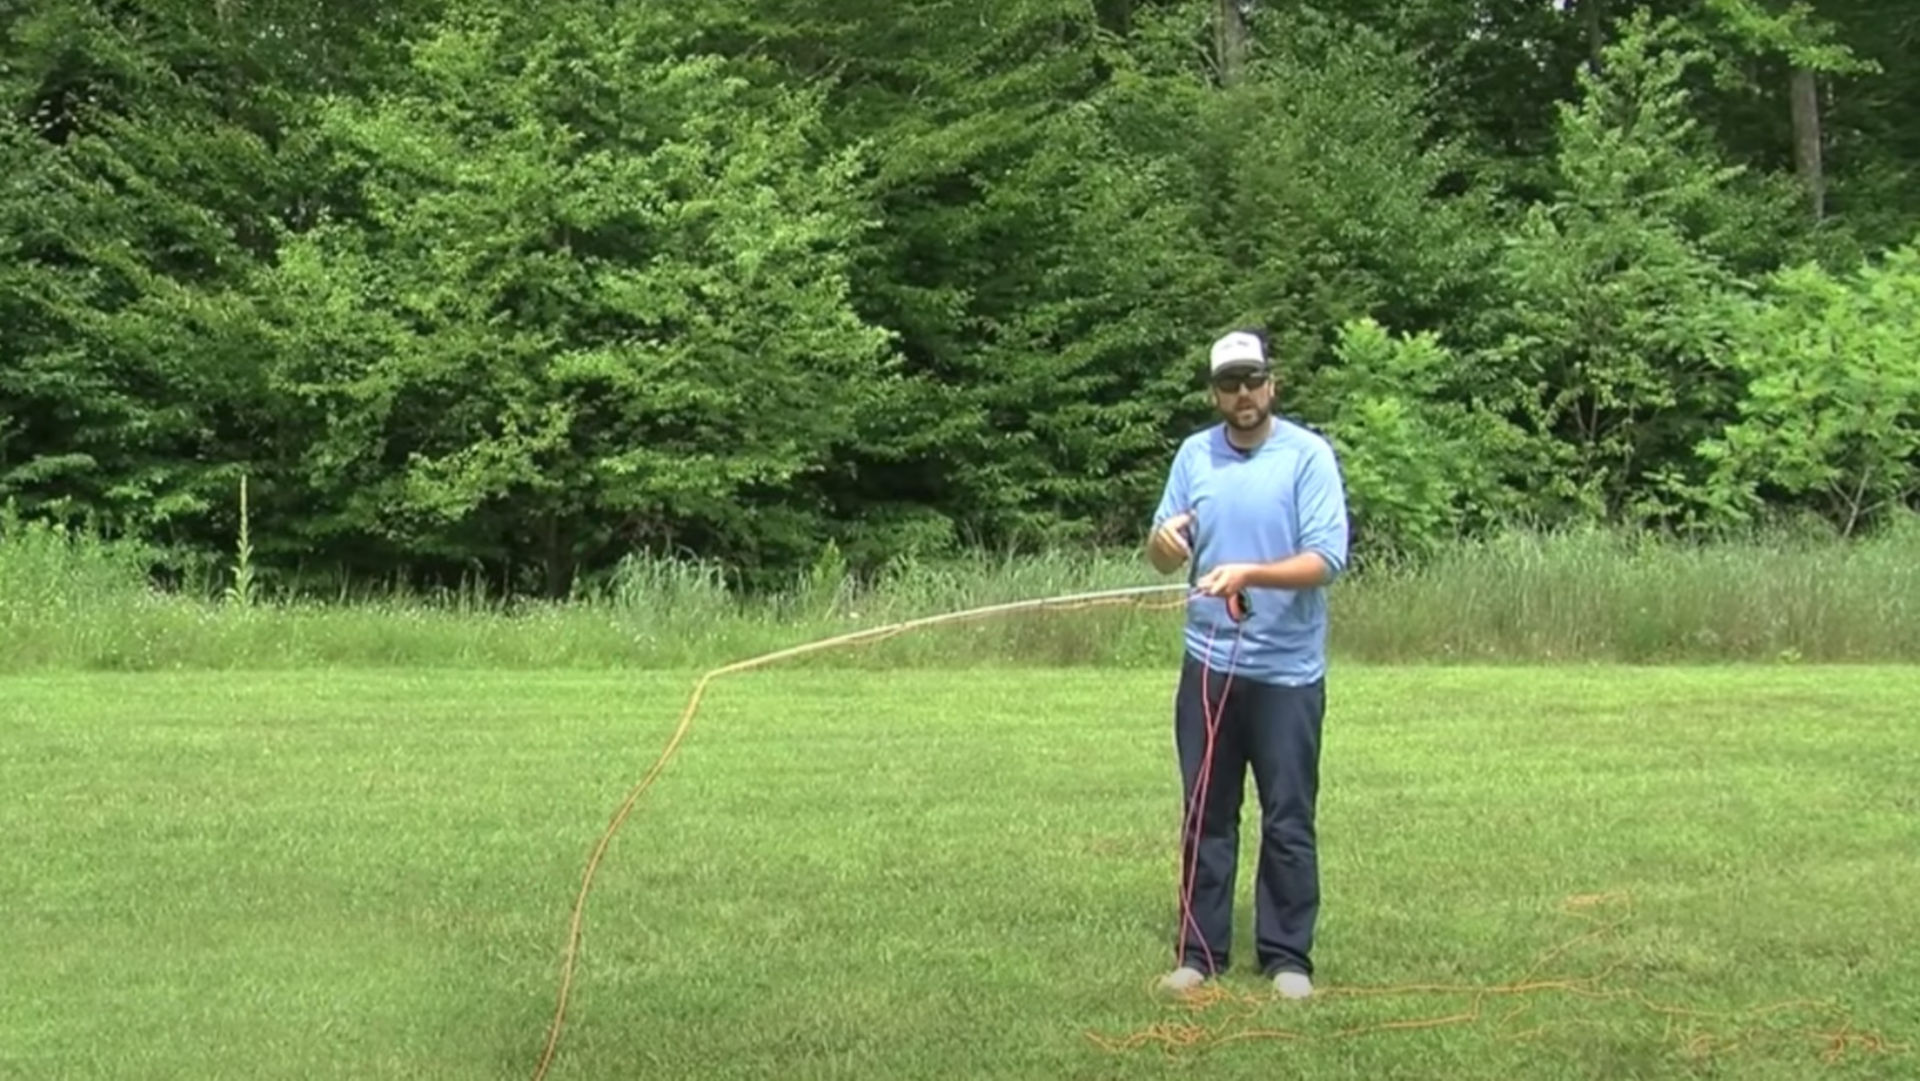 An instructor standing on grassy lawn holding a fly rod